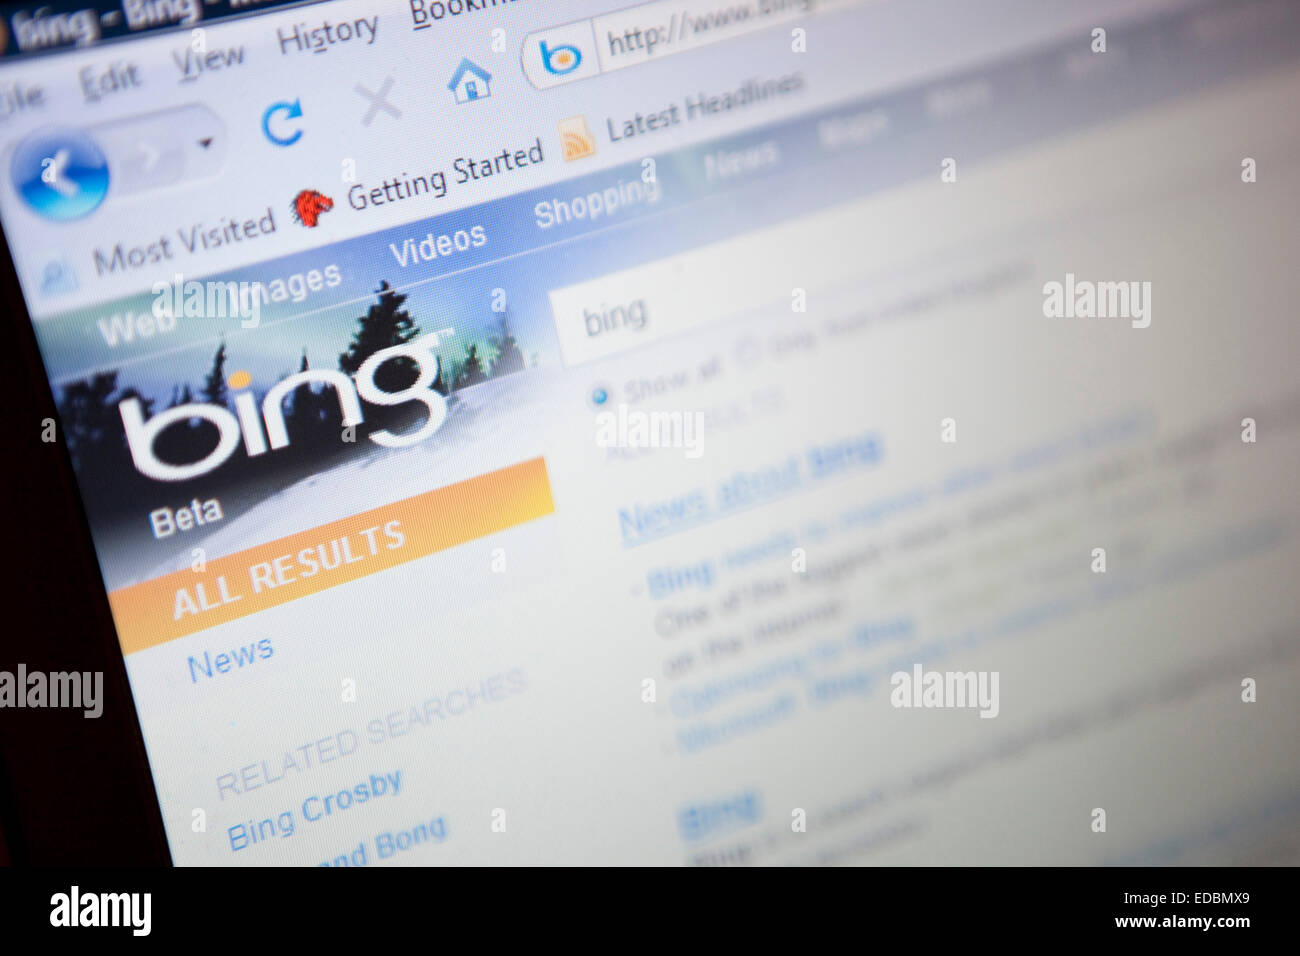 Illustrative image of the new Microsoft 'bing' search engine website. Stock Photo